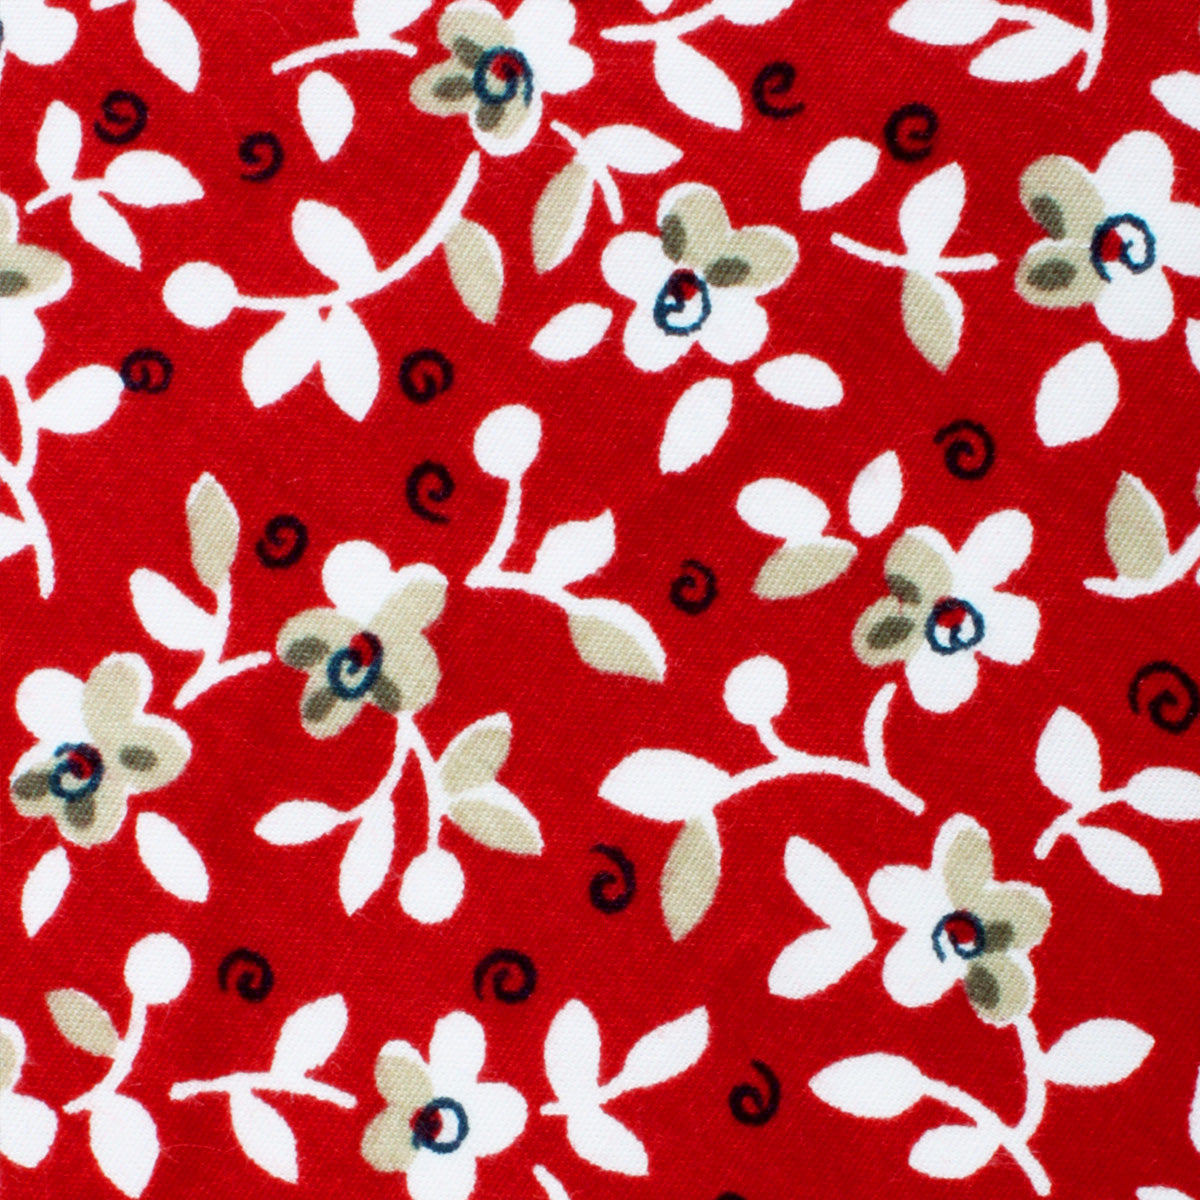 Yukata Red Floral Bow Tie Fabric